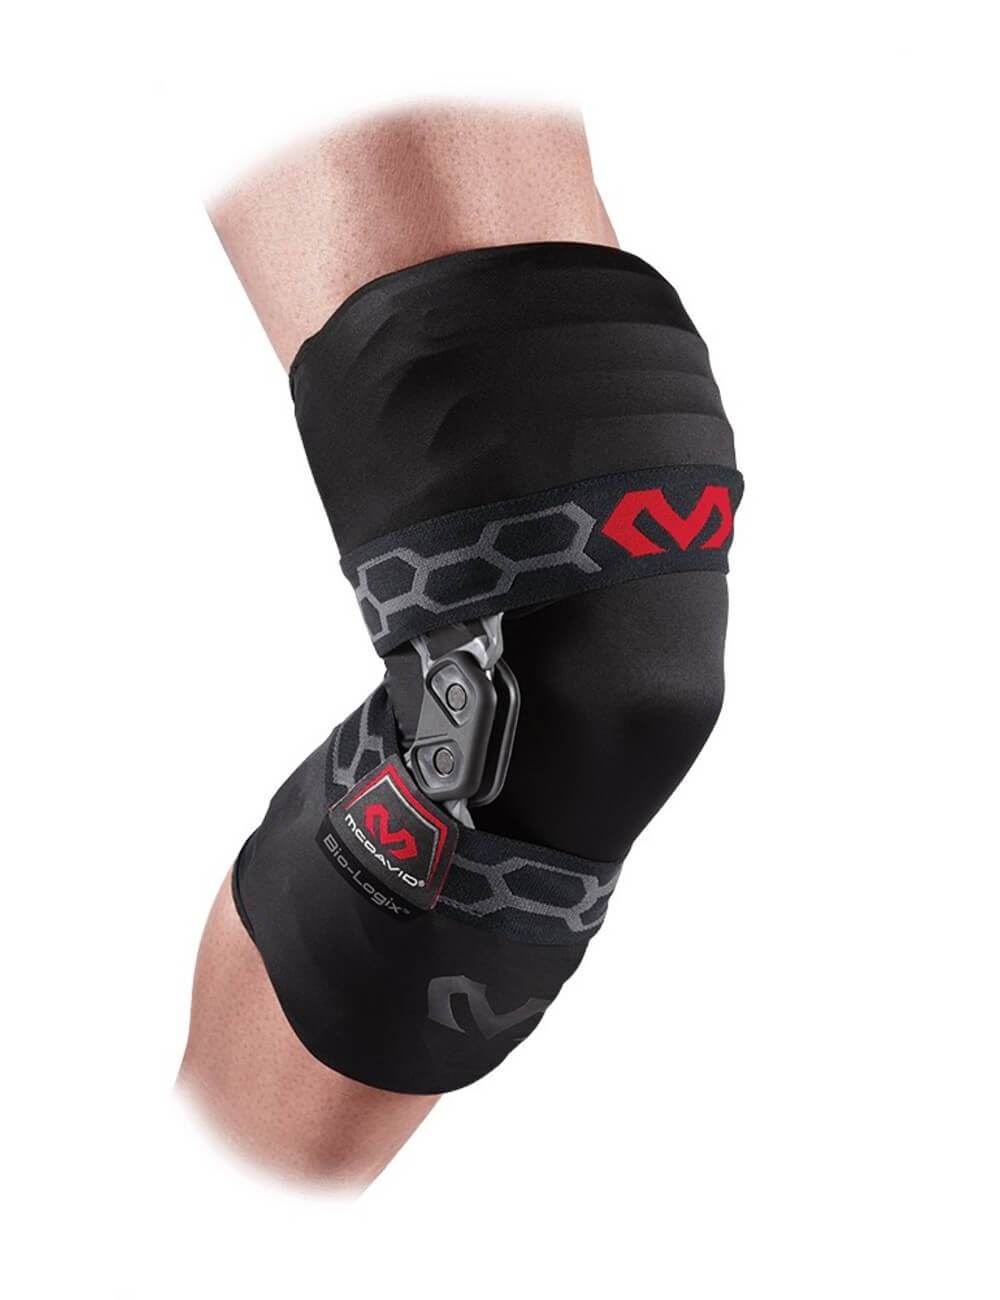 Elastic Basketball Knee Support Tape Knee Protector Safety Guard Knee Pads